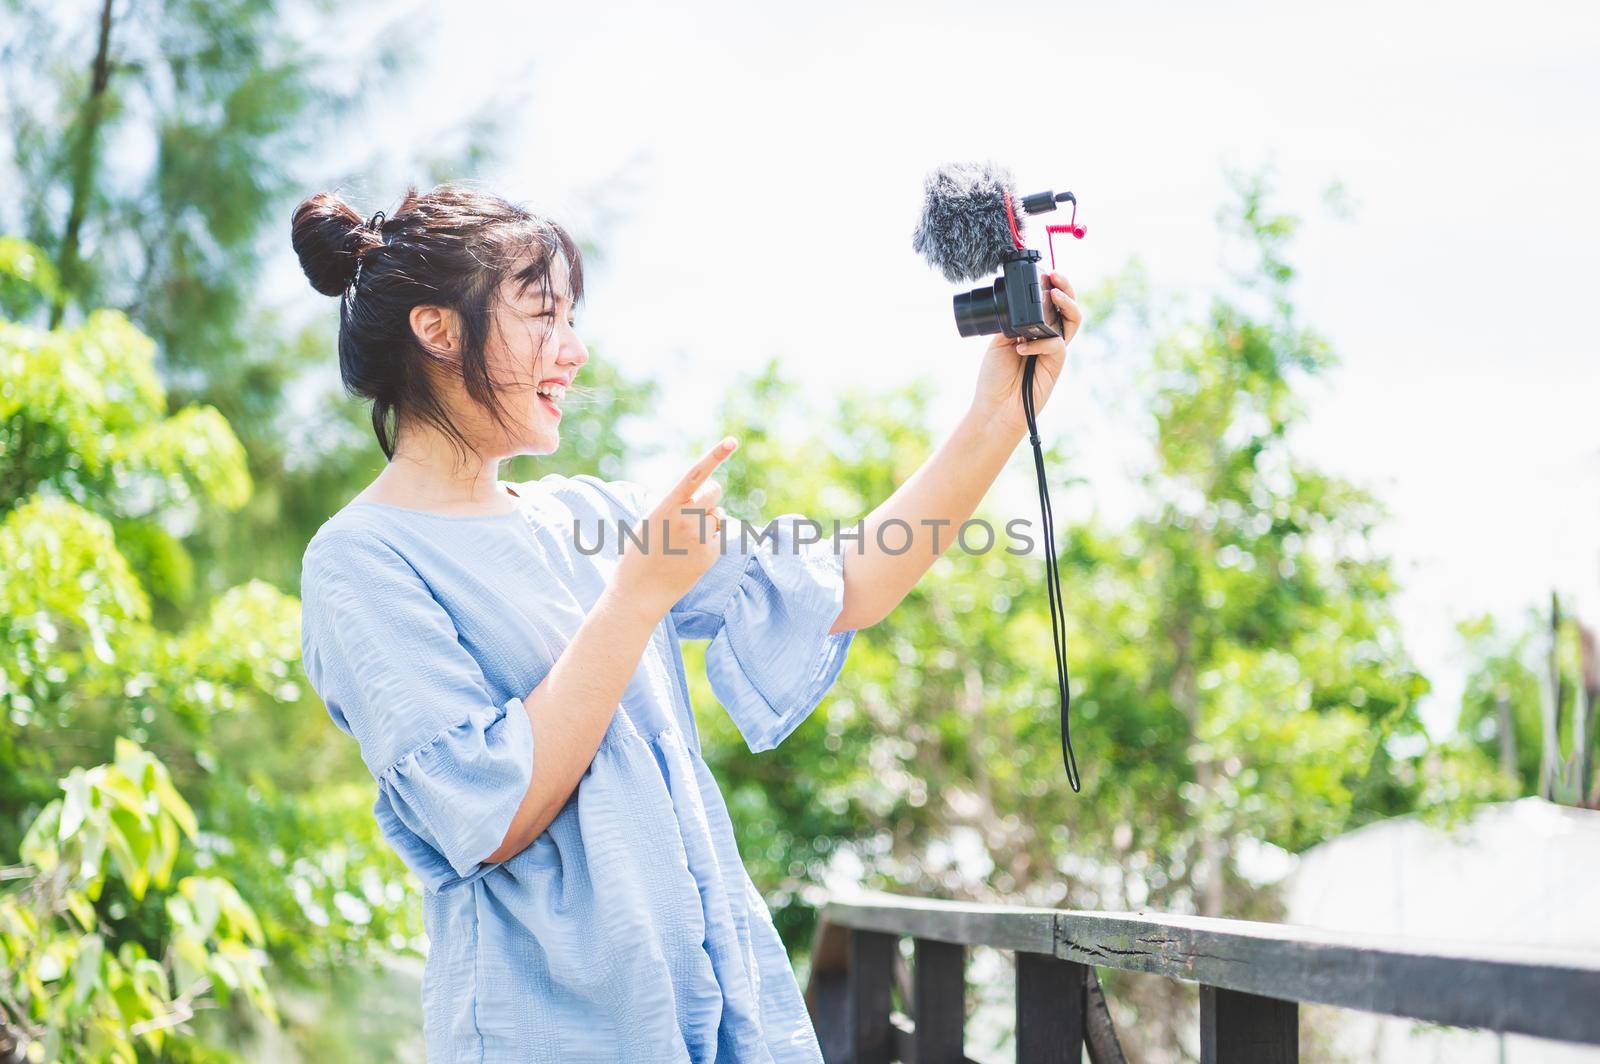 Asian woman in blue dress in public park carrying digital mirrorless camera and taking photo and vlog in happy mood. People lifestyle and leisure concept. Outdoor travel and Nature theme.